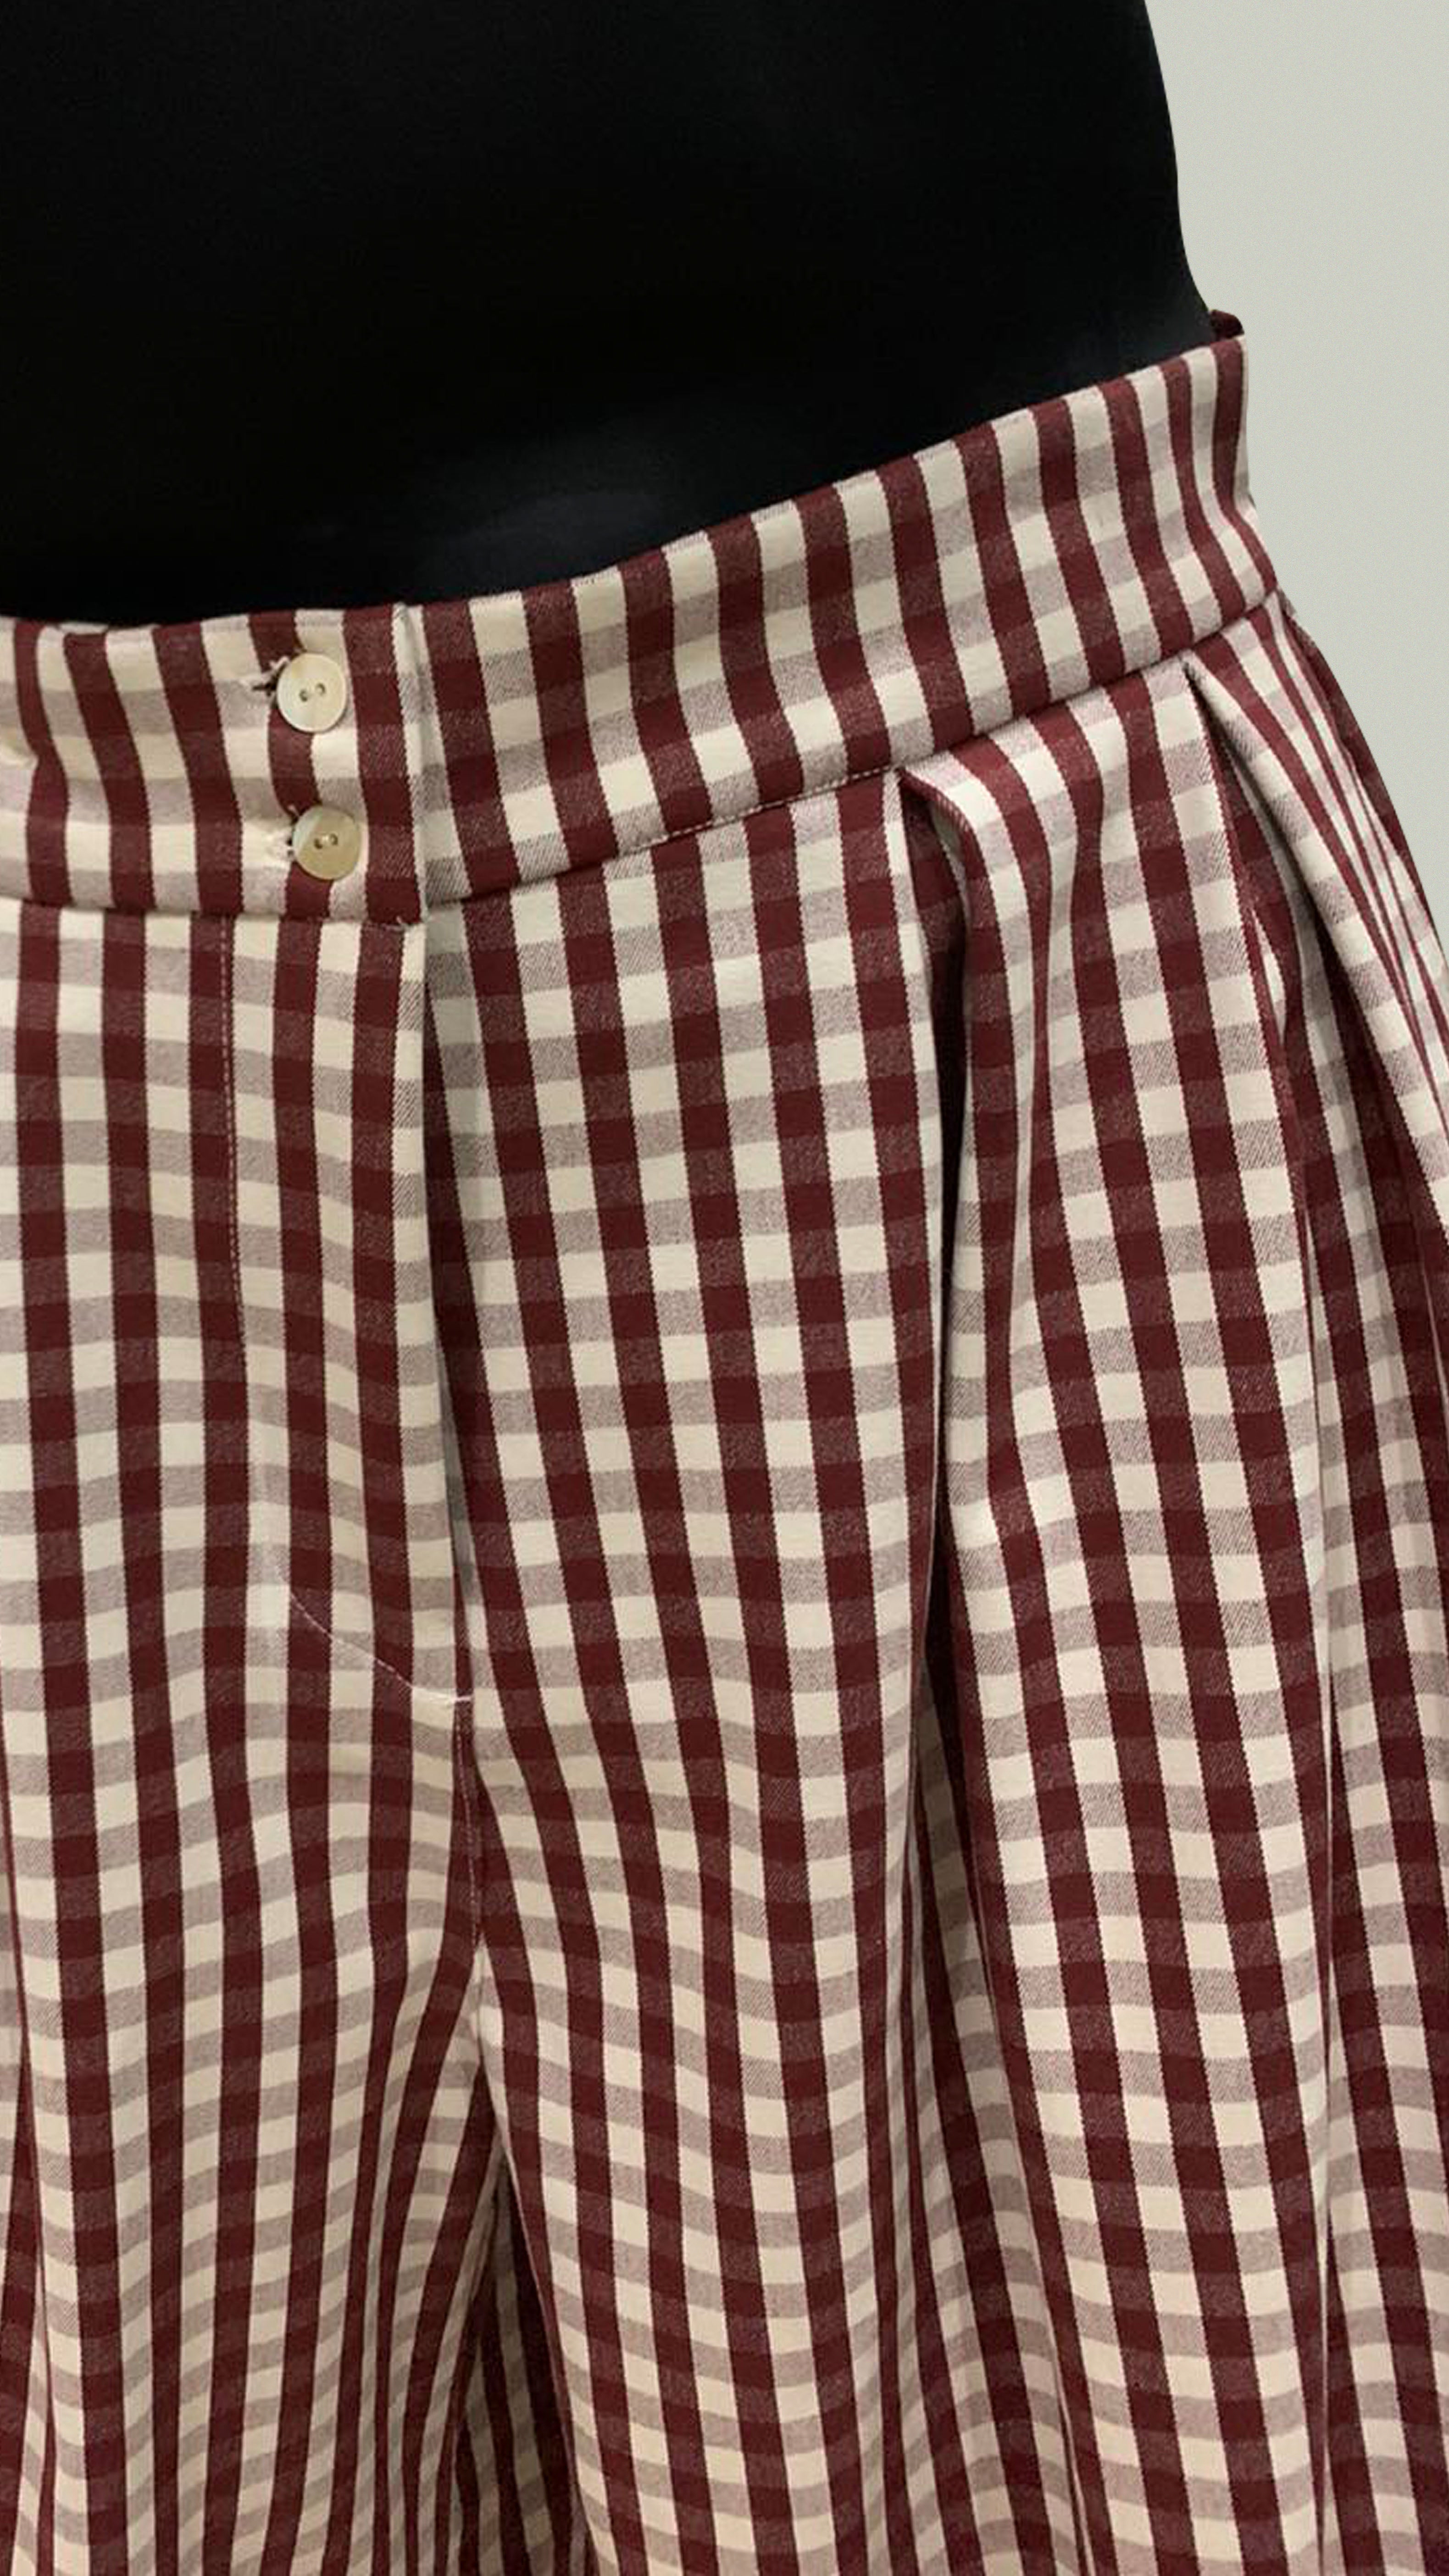 Double Front Pleat Wide Leg Pants in White and Maroon Gingham